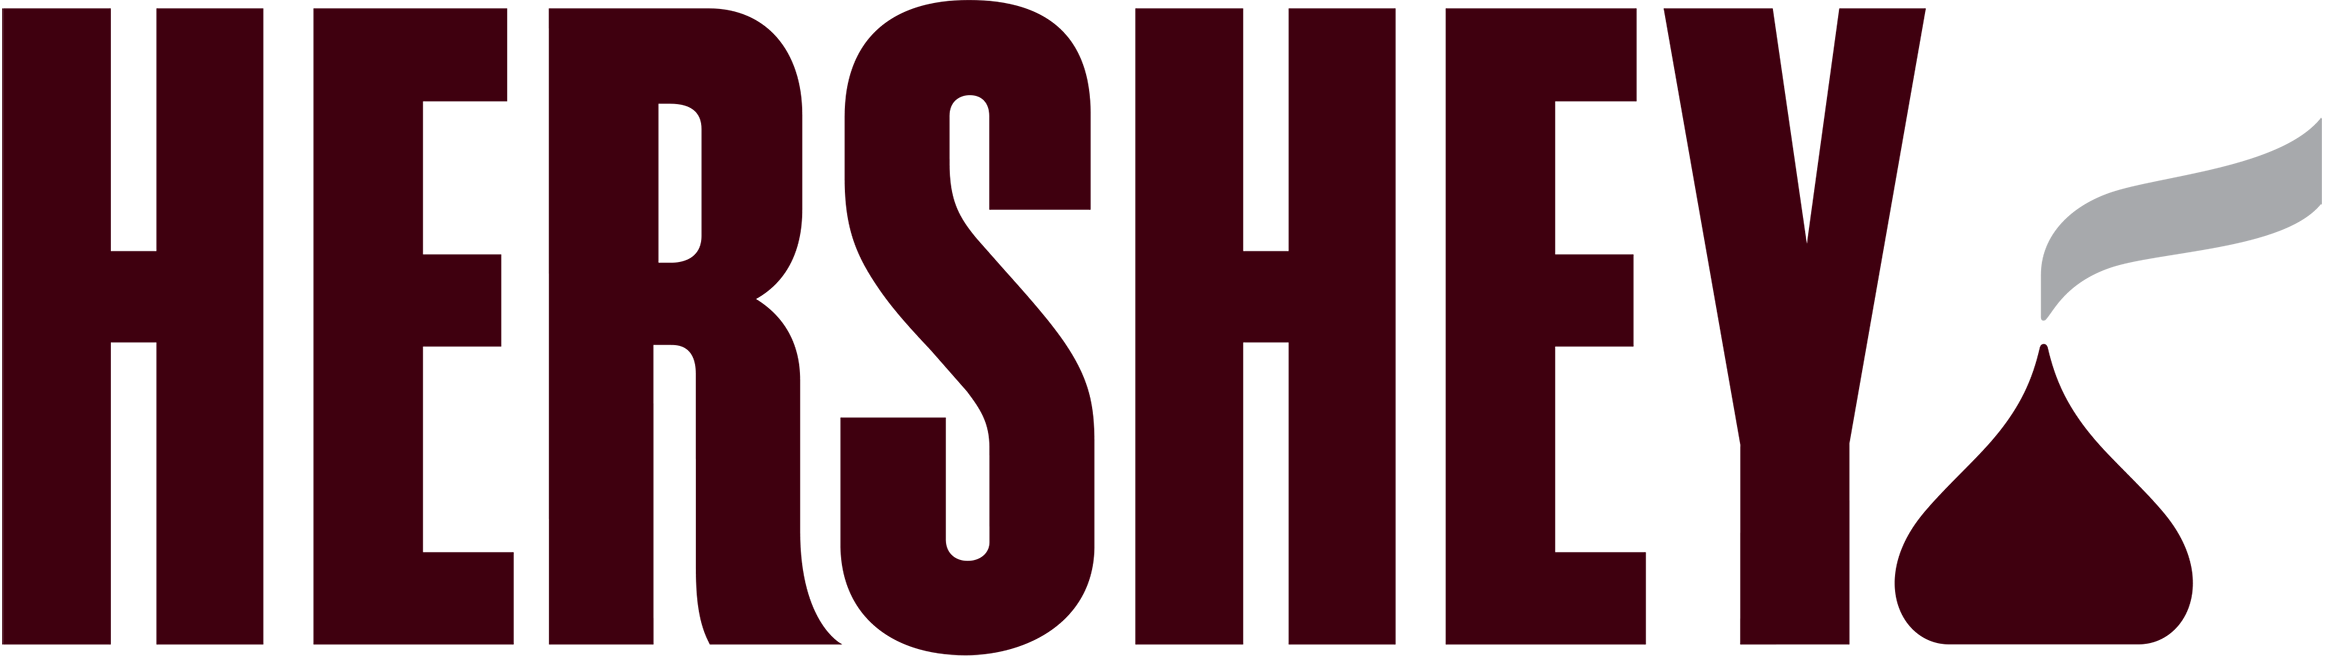 Hershey_Logo_2Color_Munsell